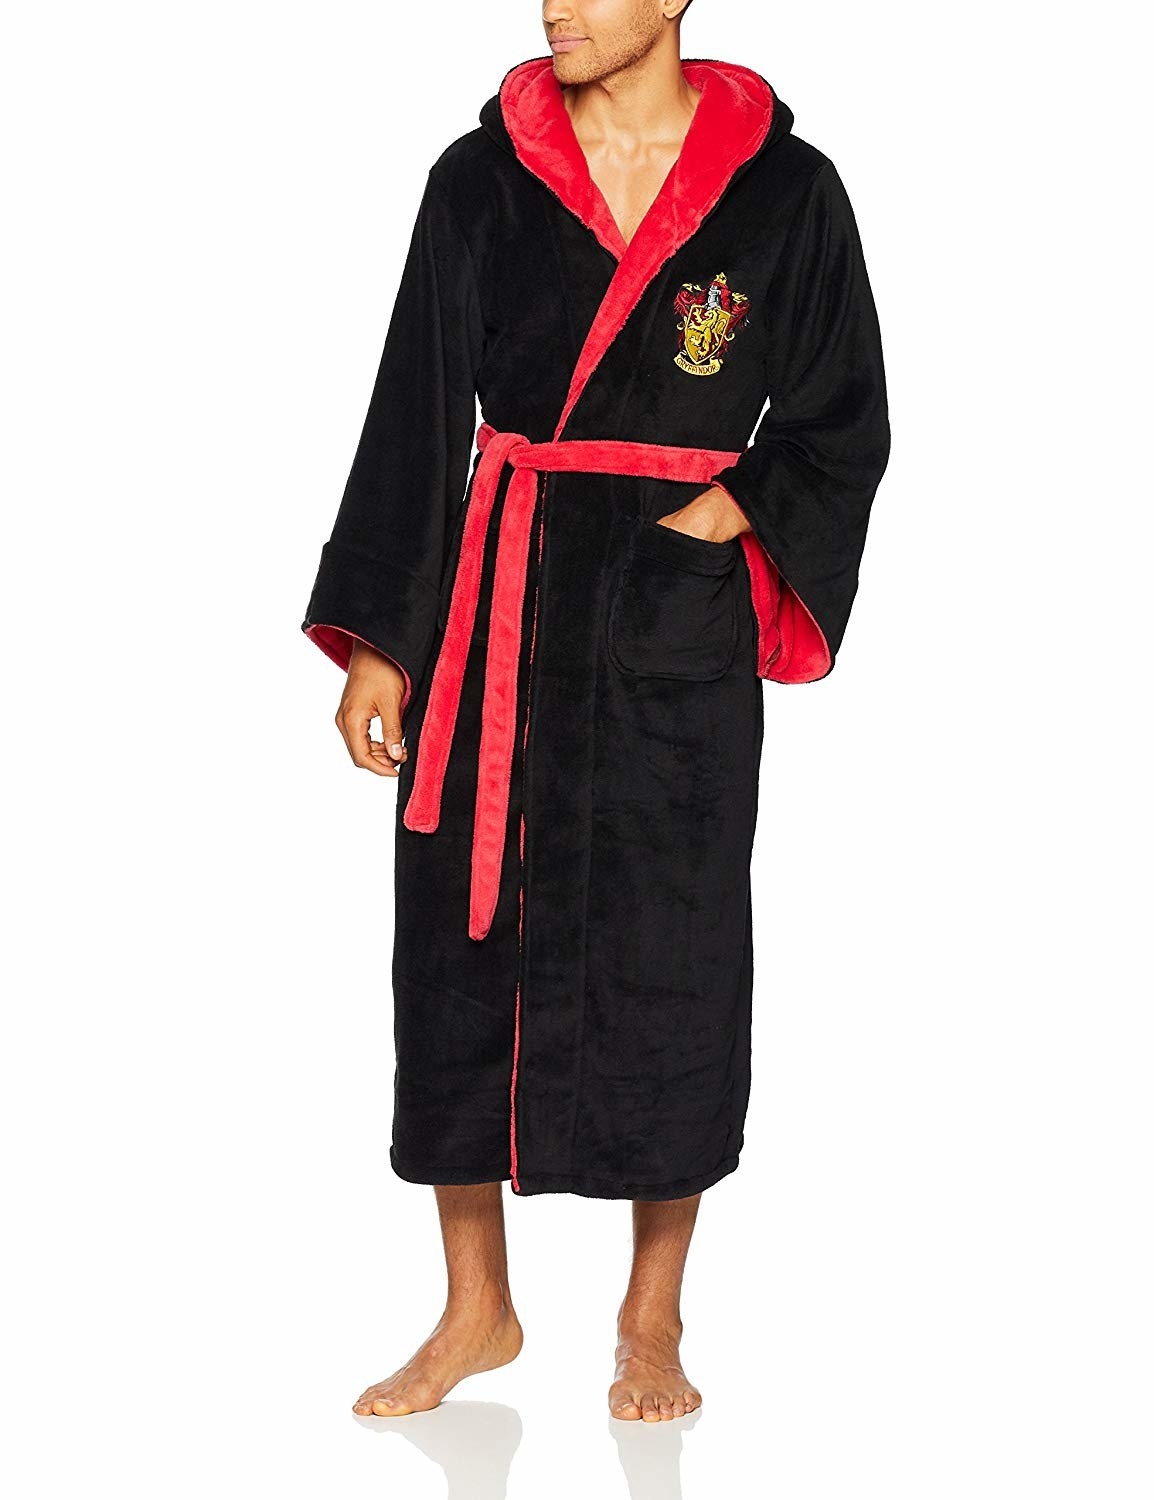 Featured image of post Diy Hogwarts Robe This should be red for gryffindor